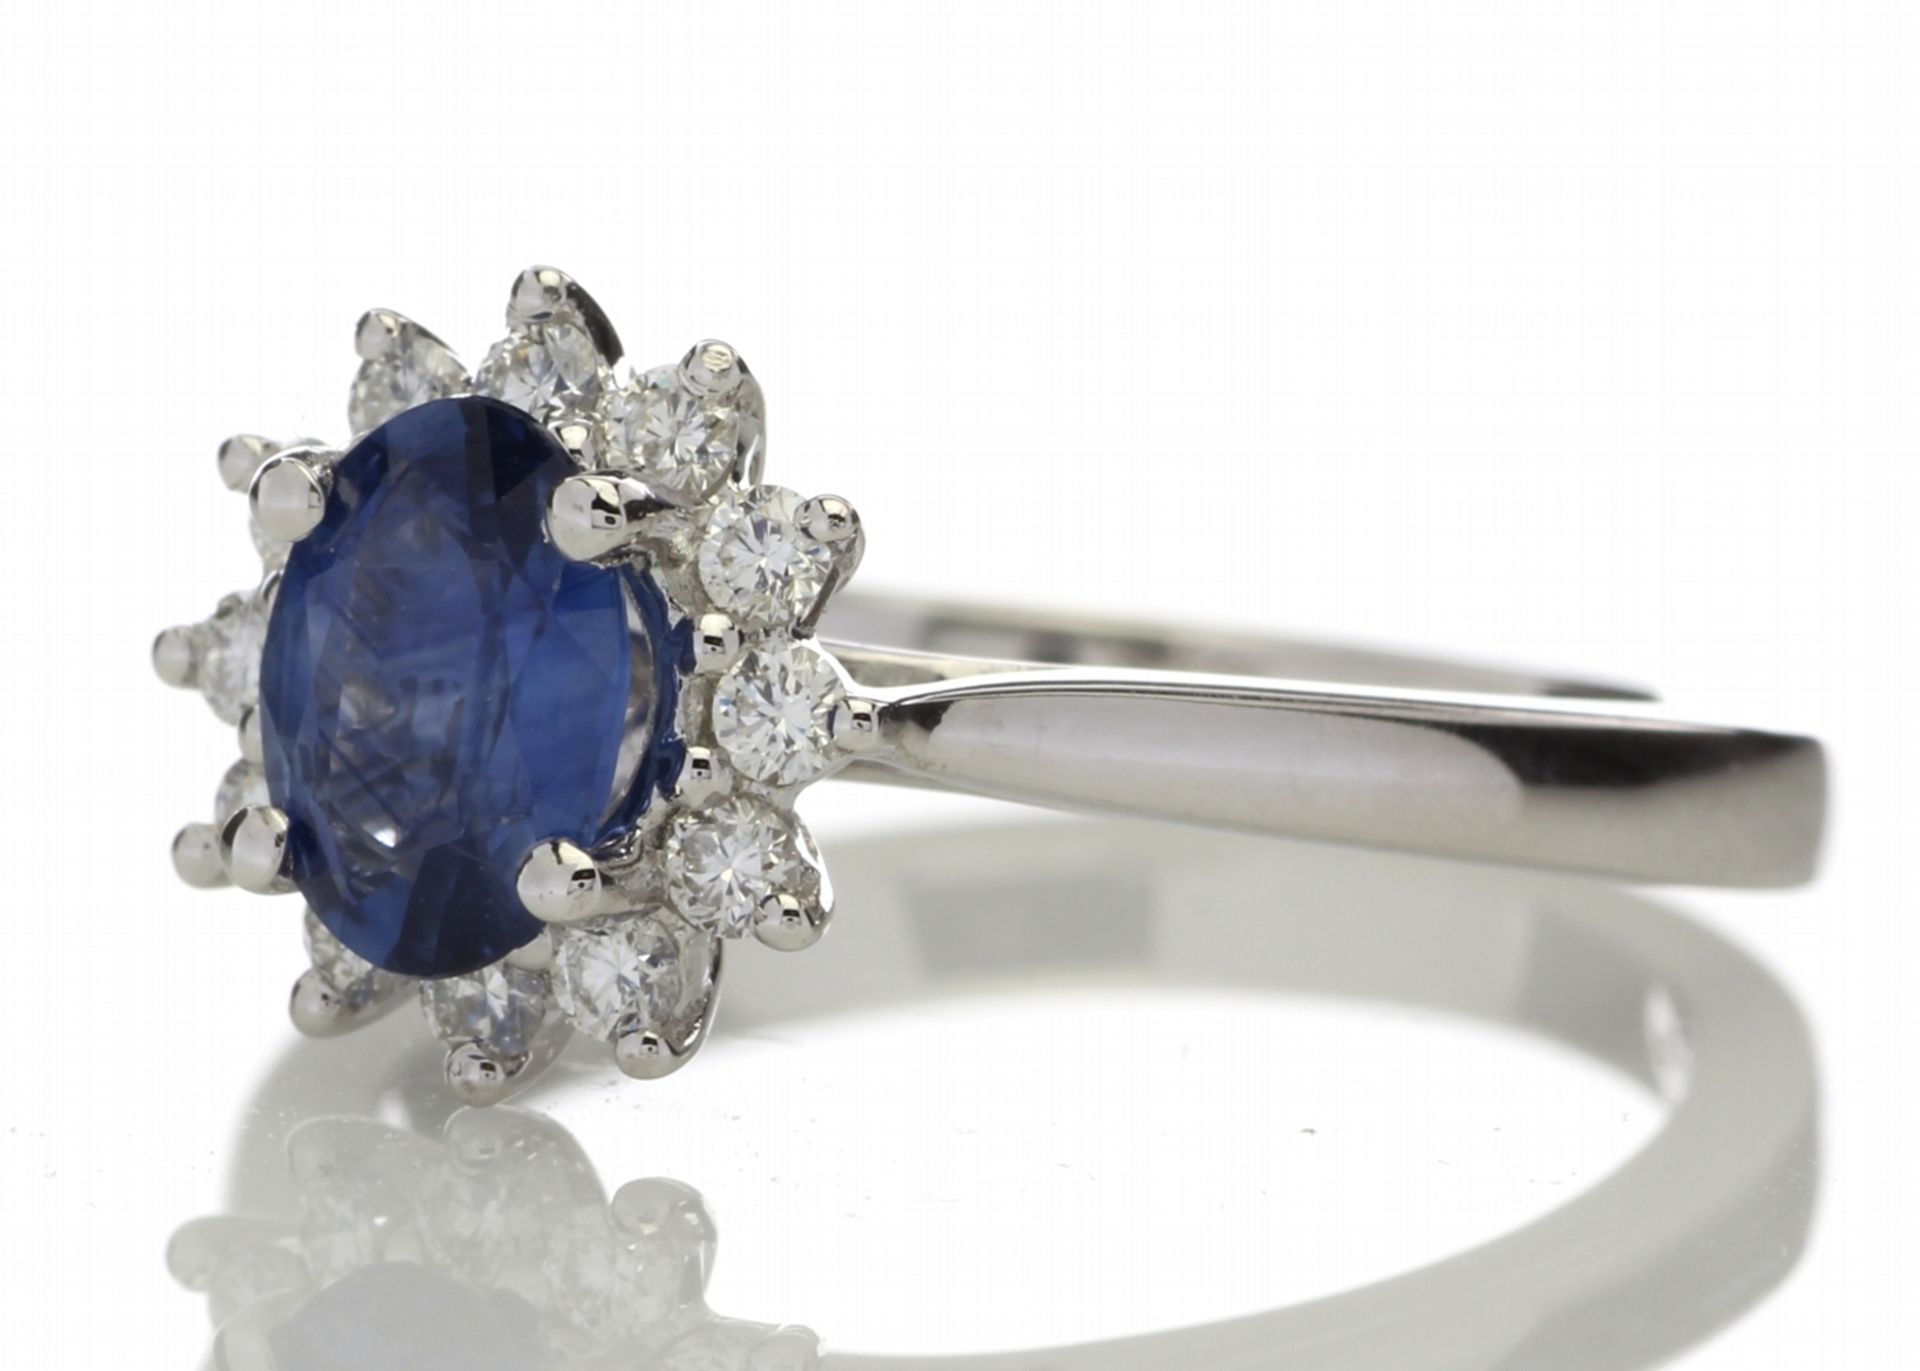 18ct White Gold Diamond And Sapphire Cluster Ring 0.25 Carats - Valued By GIE £11,150.00 - Classic - Image 2 of 5